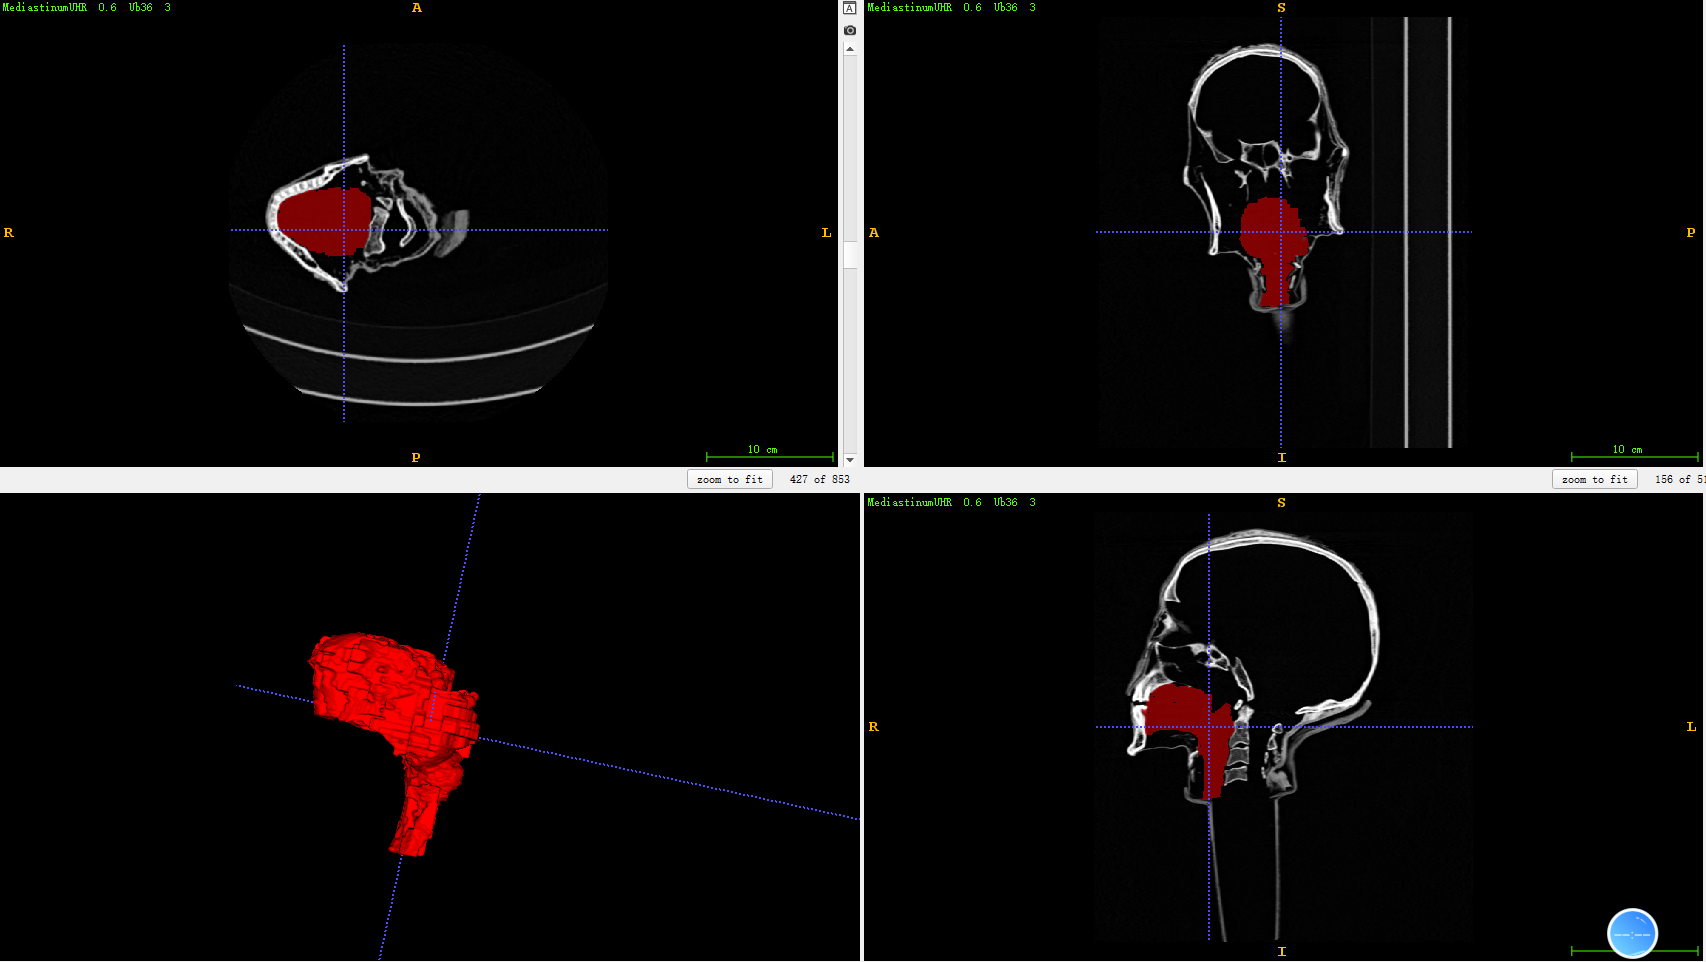 Processing of the 3D model of the vocal tract based on the available computed tomography data of the mummy.